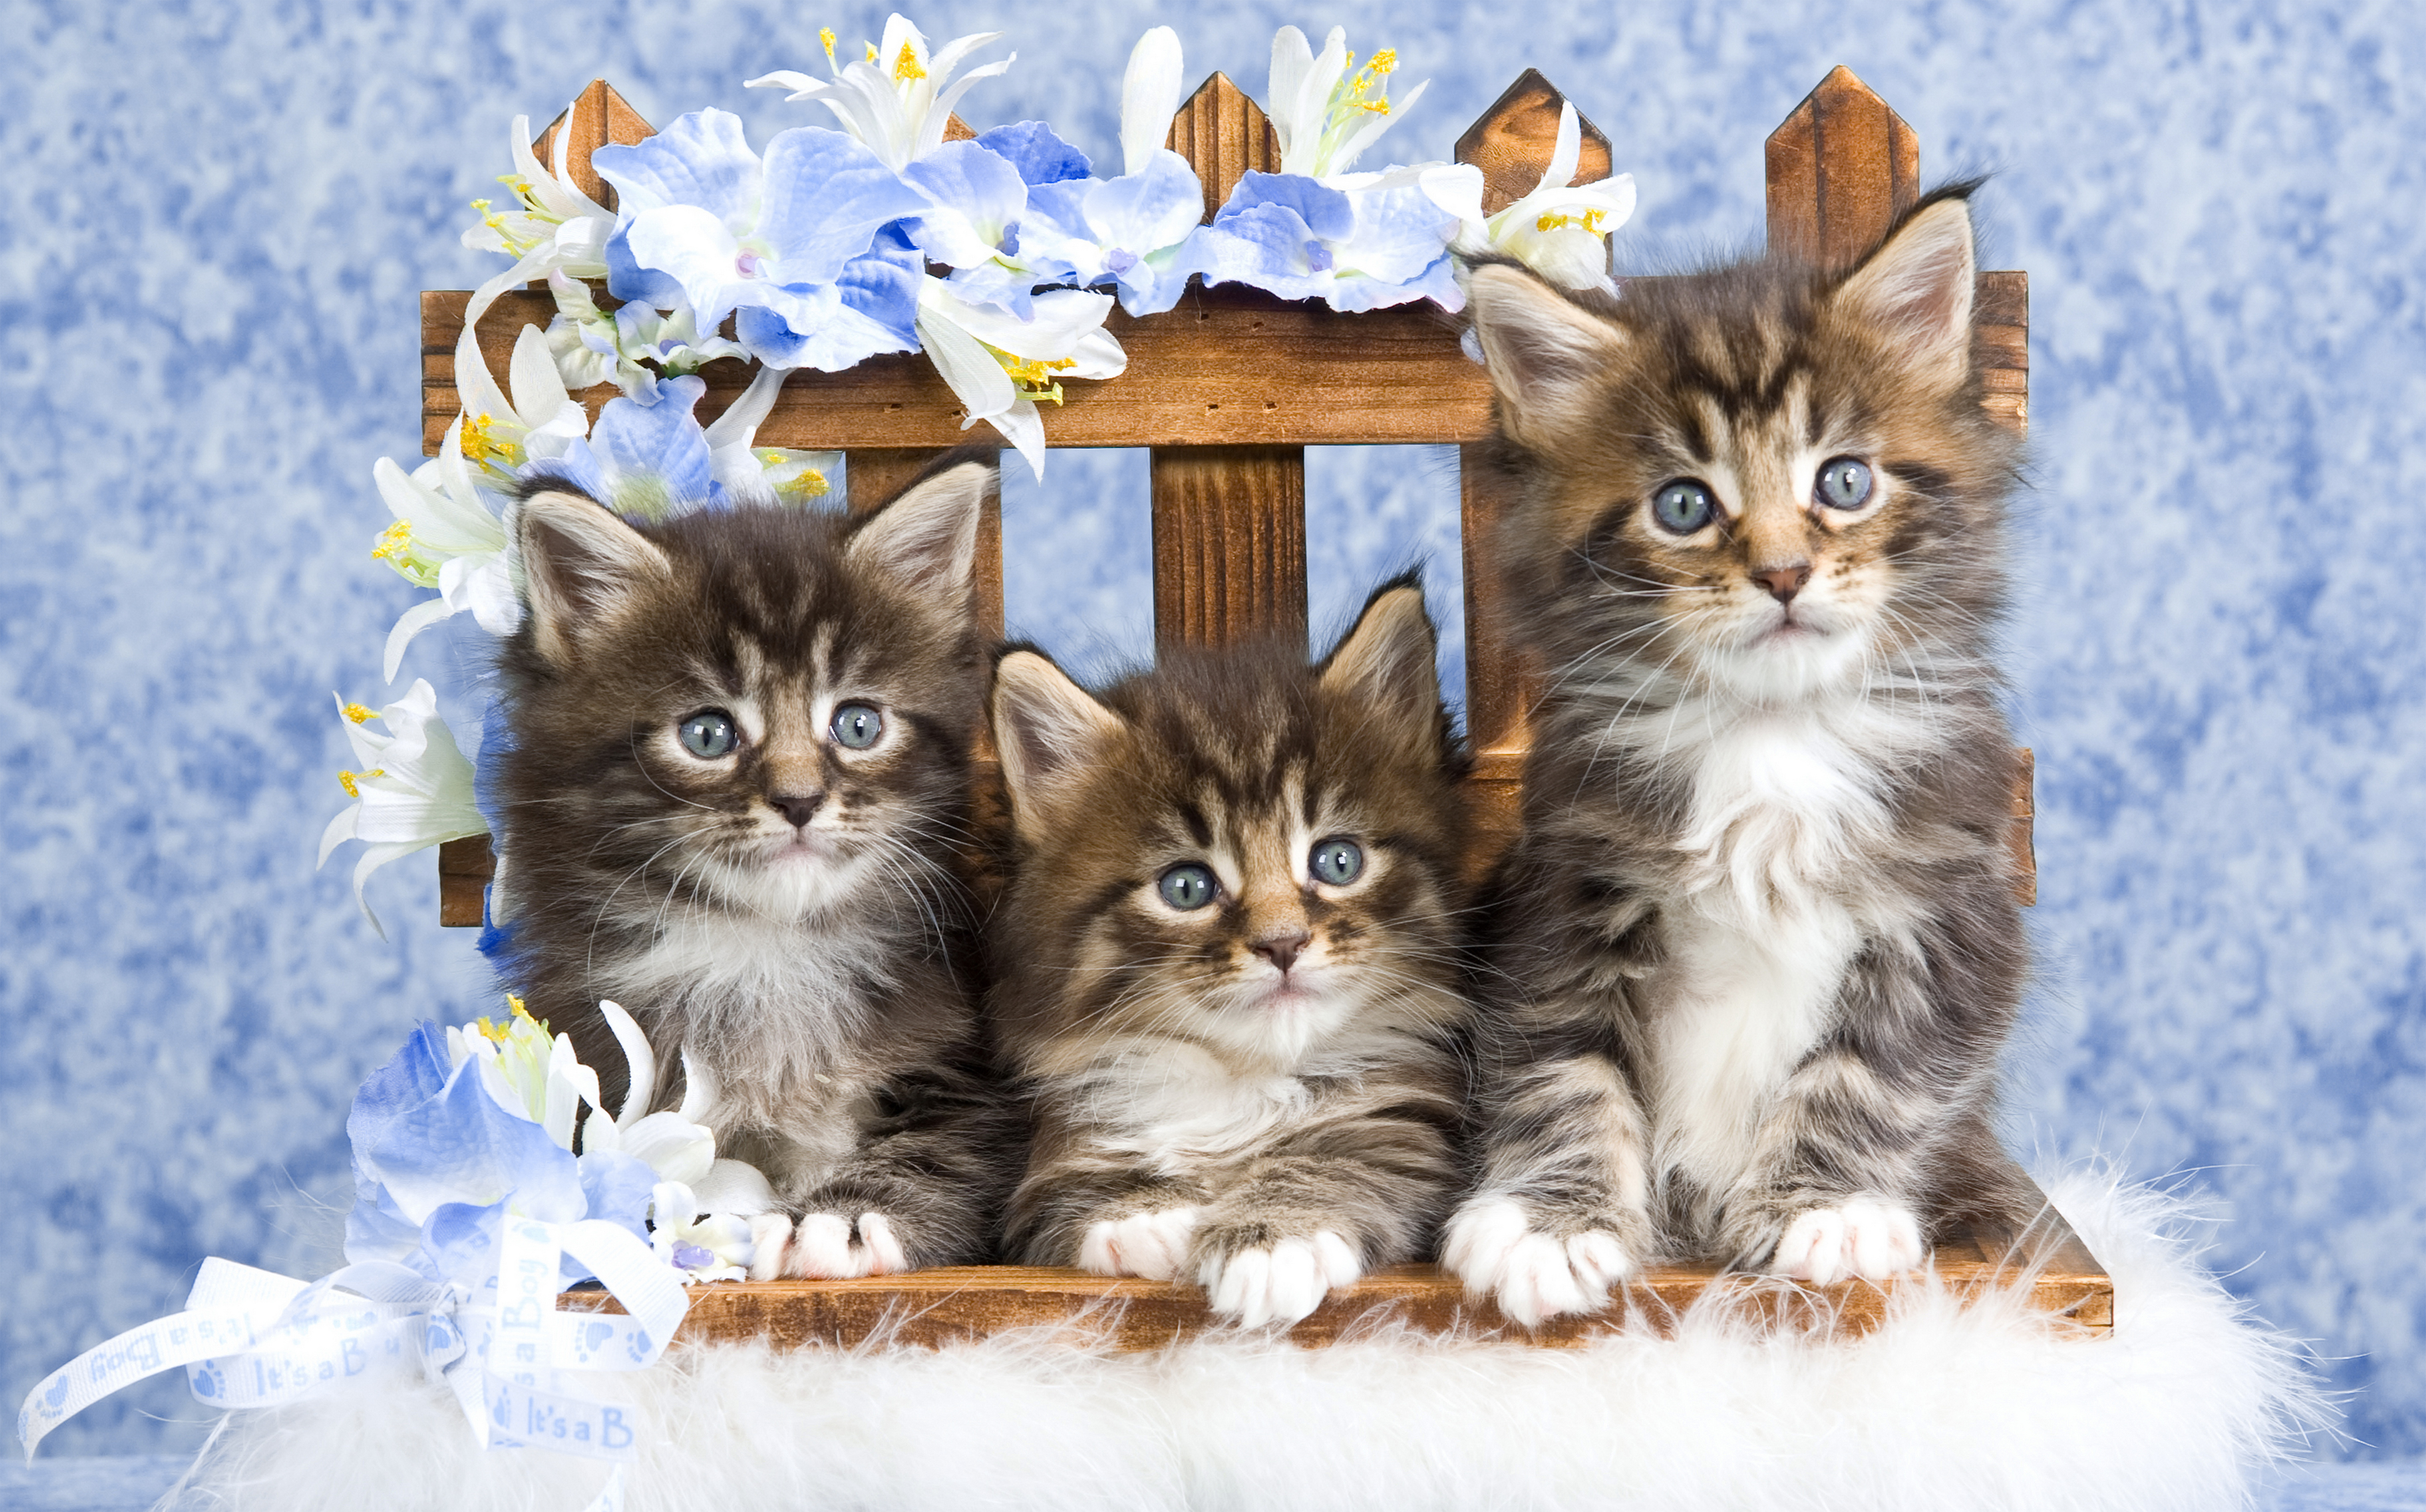 Kittens And Flowers Background Gallery Yopriceville High